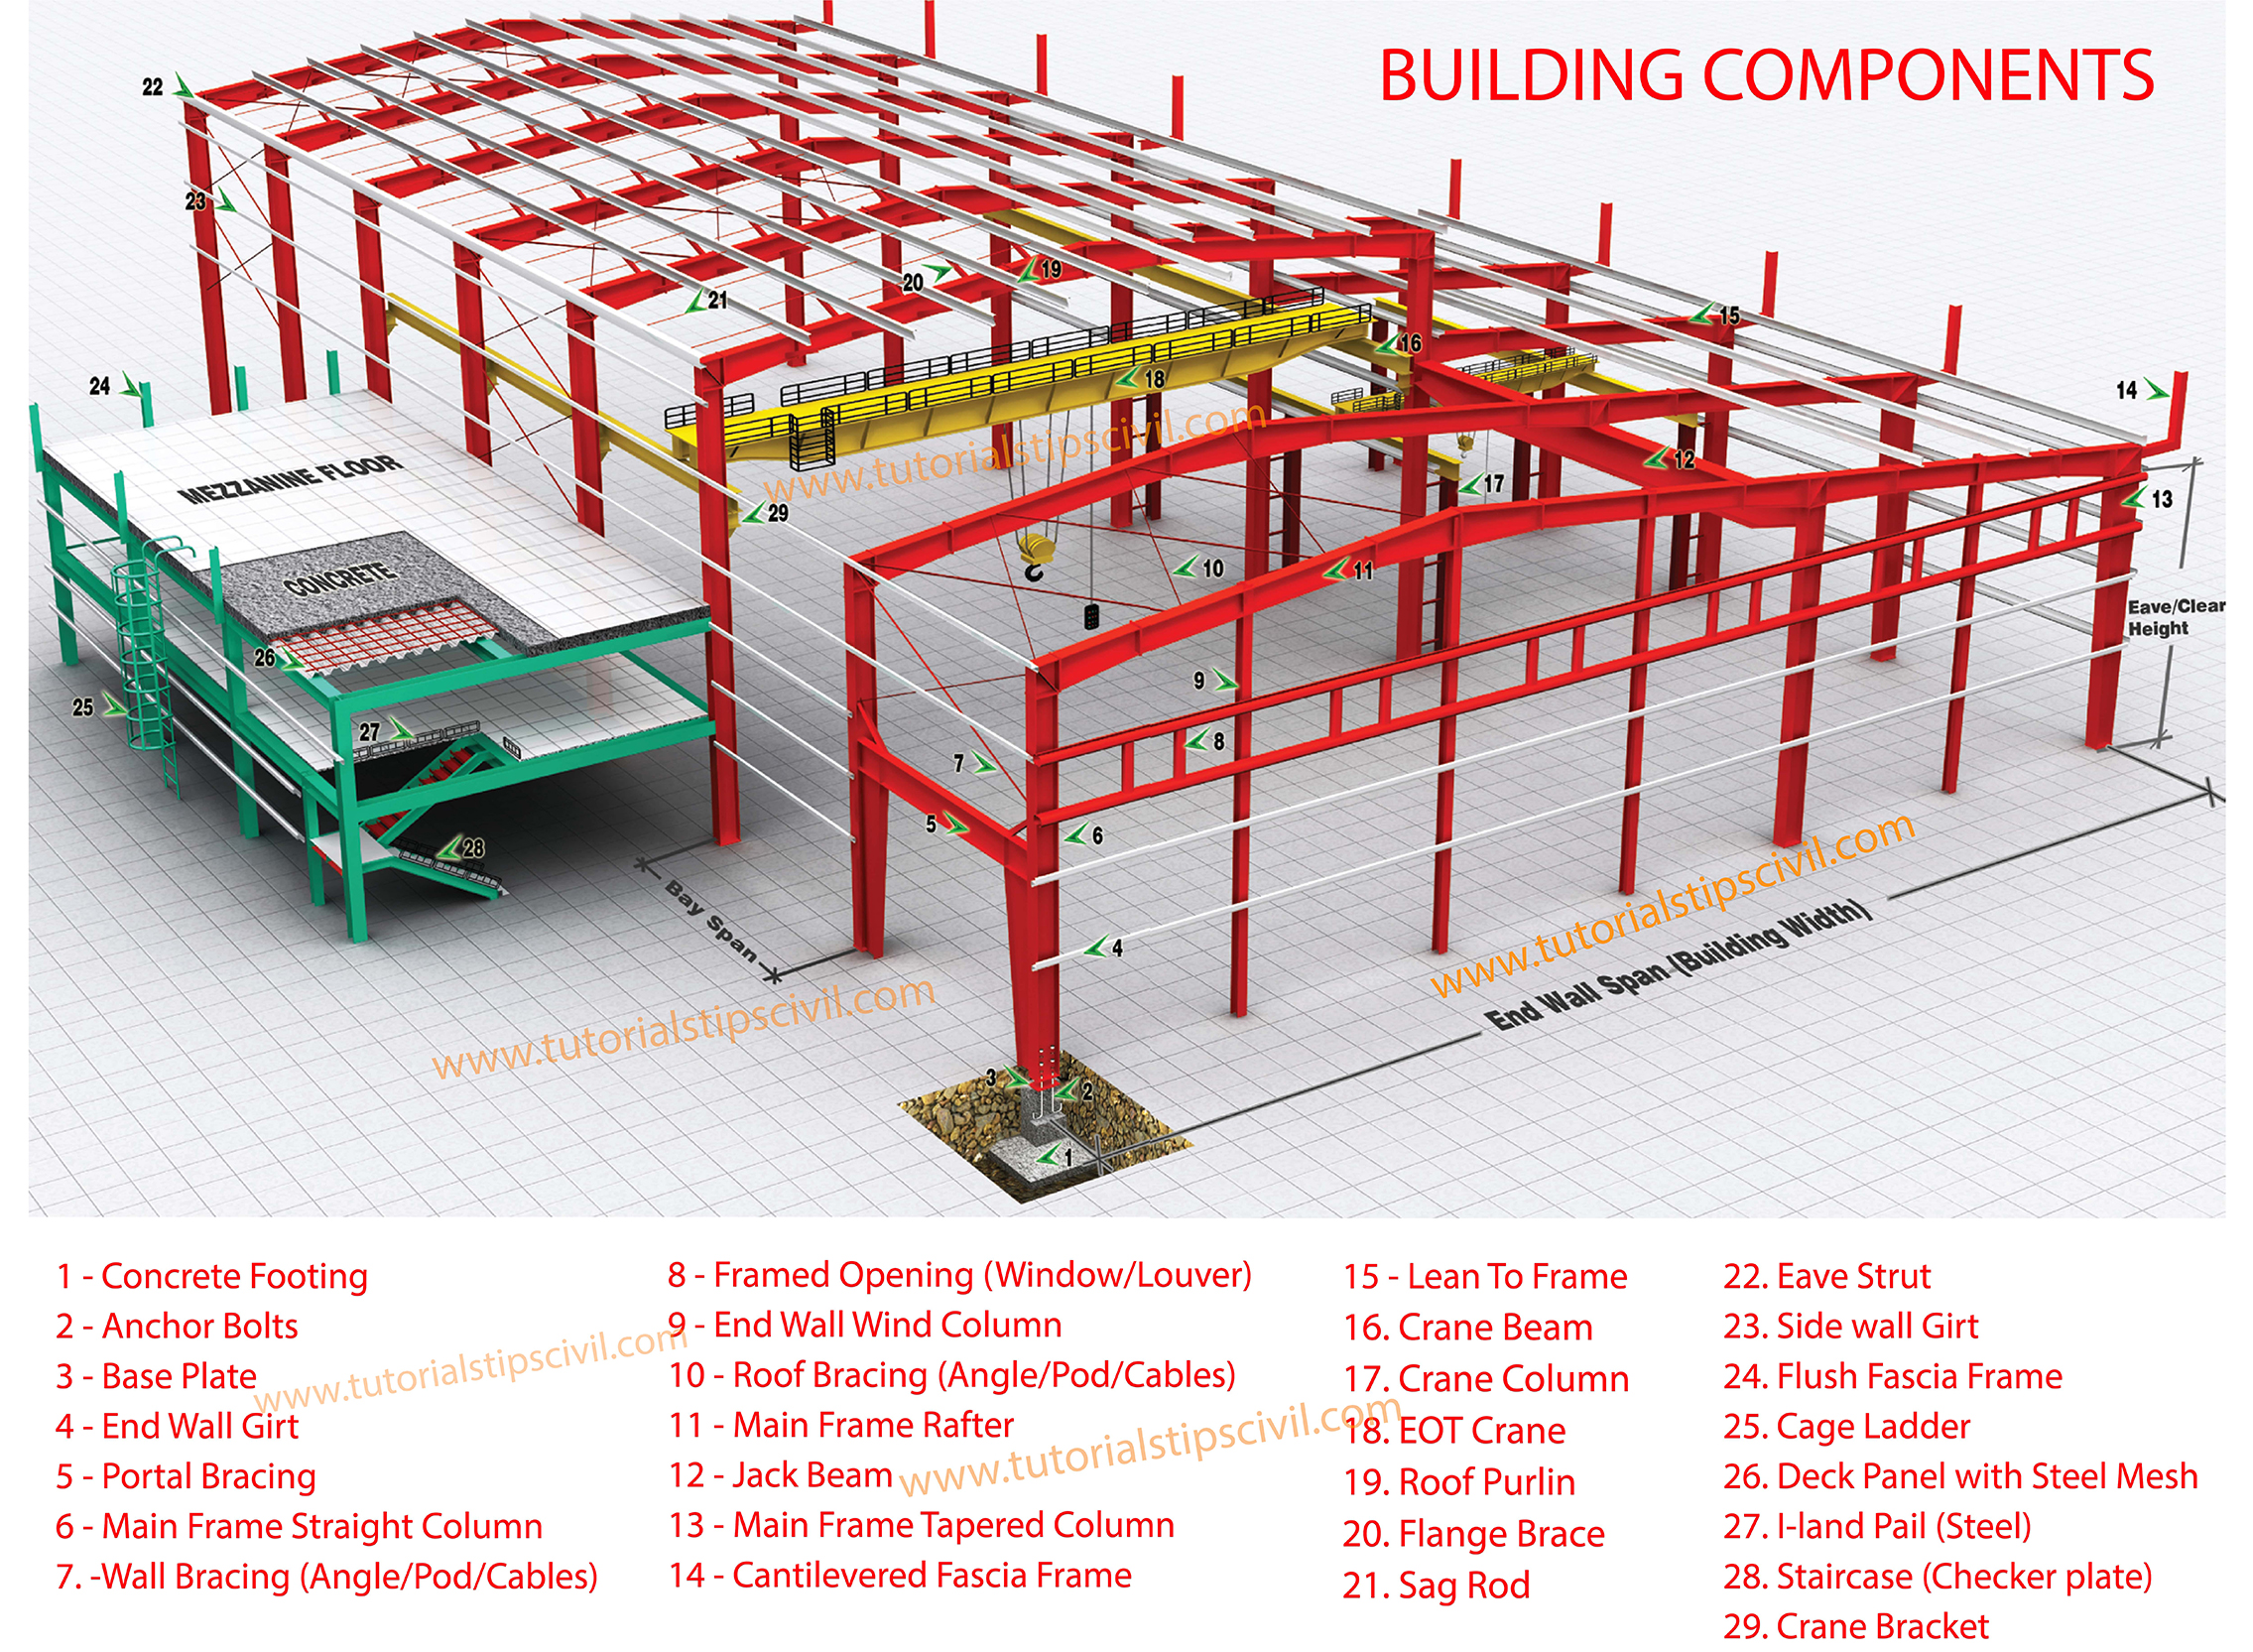 COMPONENTS OF PRE-ENGINEERED BUILDINGS (PEB)